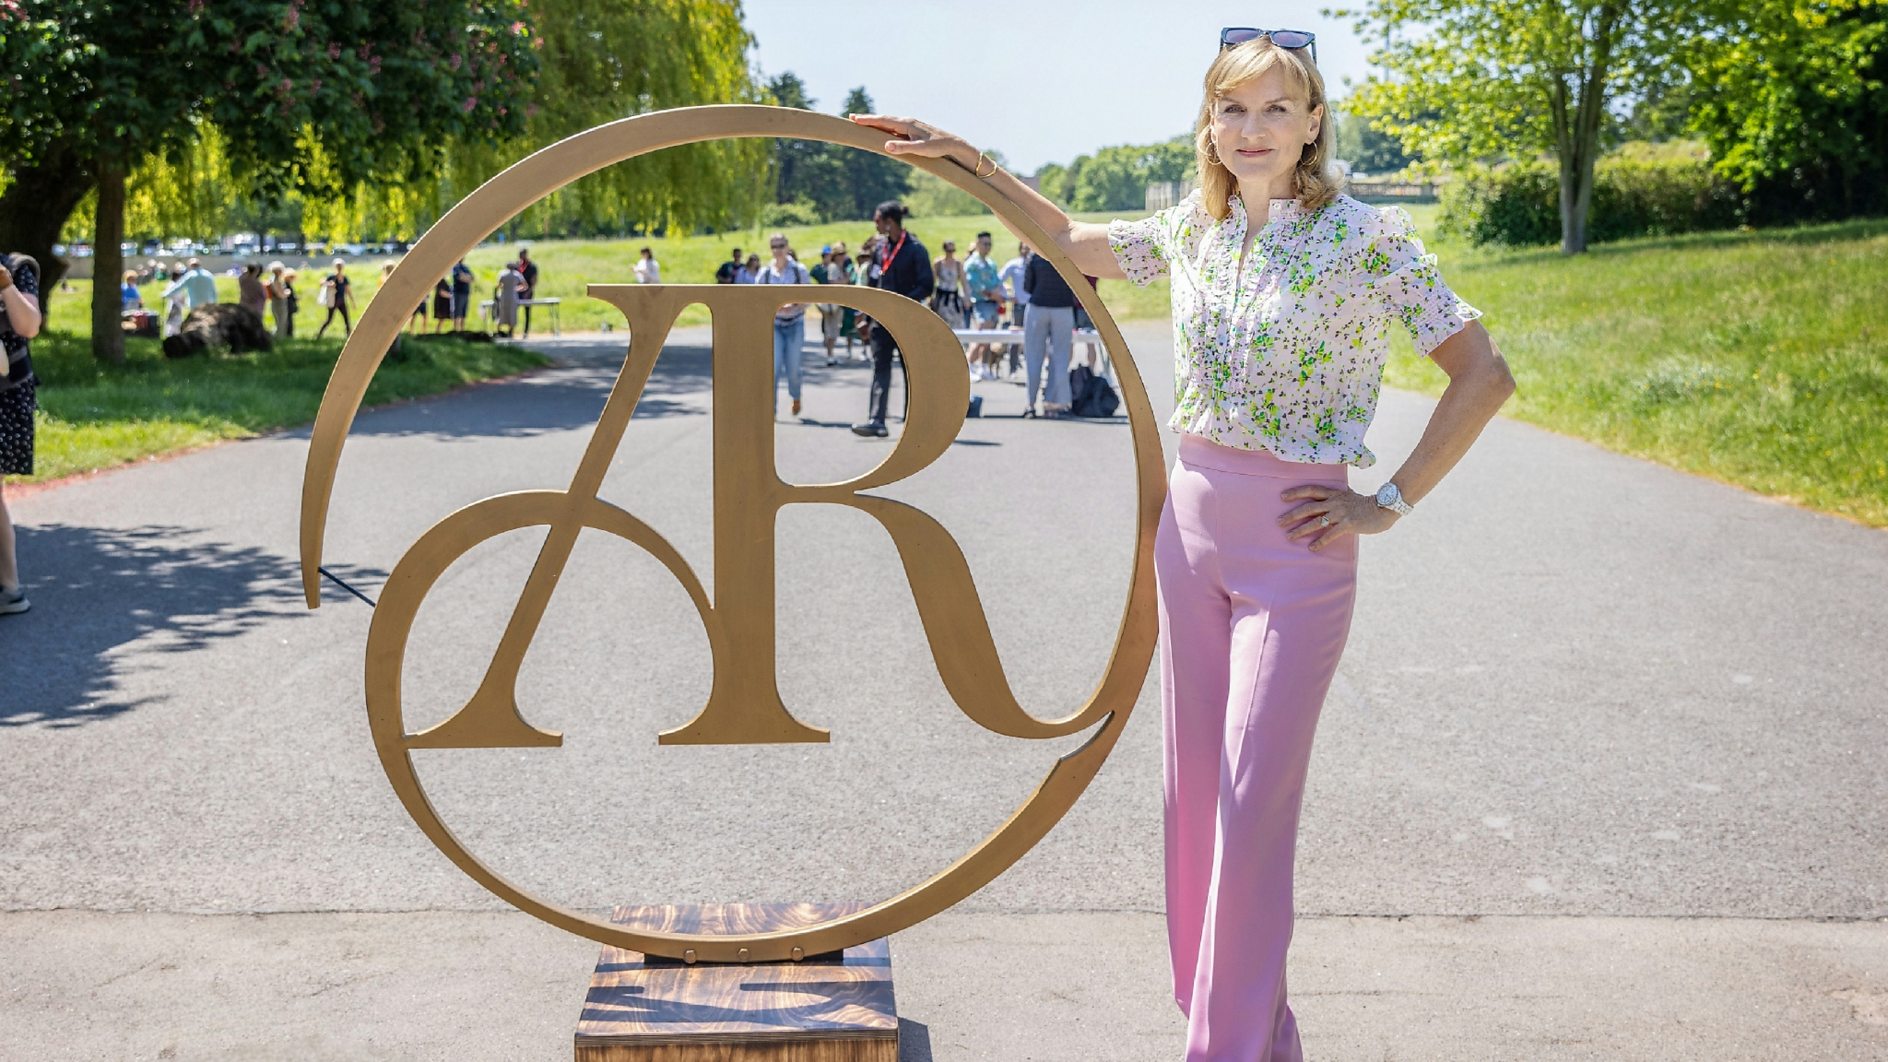 BBC One’s Antiques Roadshow returns this summer coming to a location near you - bring your antiques